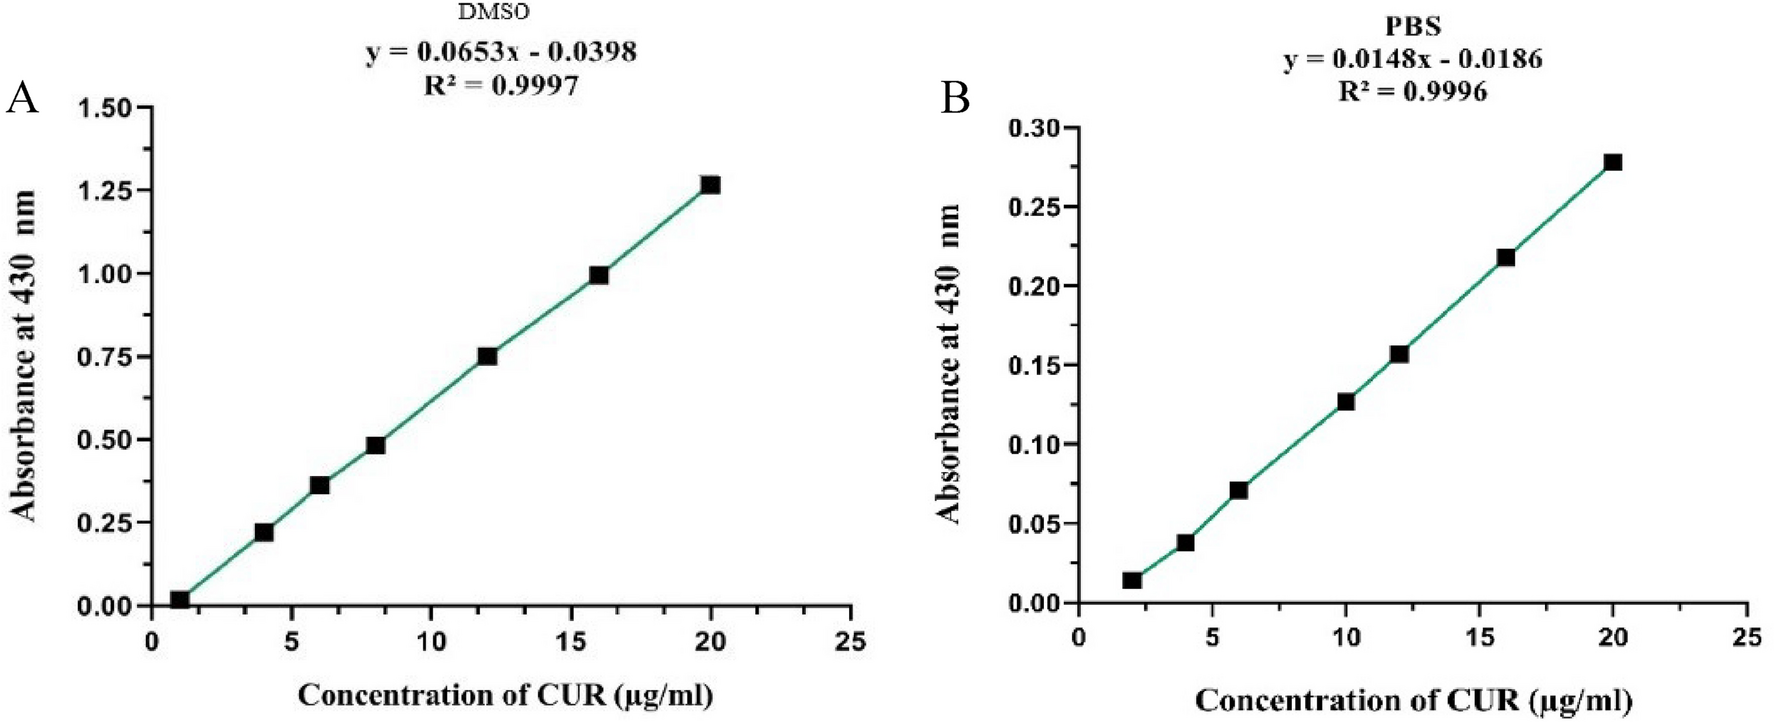 Regulation of the P53 tumor suppressor gene and the Mcl-2 oncogene expression by an active herbal component delivered through a smart thermo-pH-sensitive PLGA carrier to improve Osteosarcoma treatment